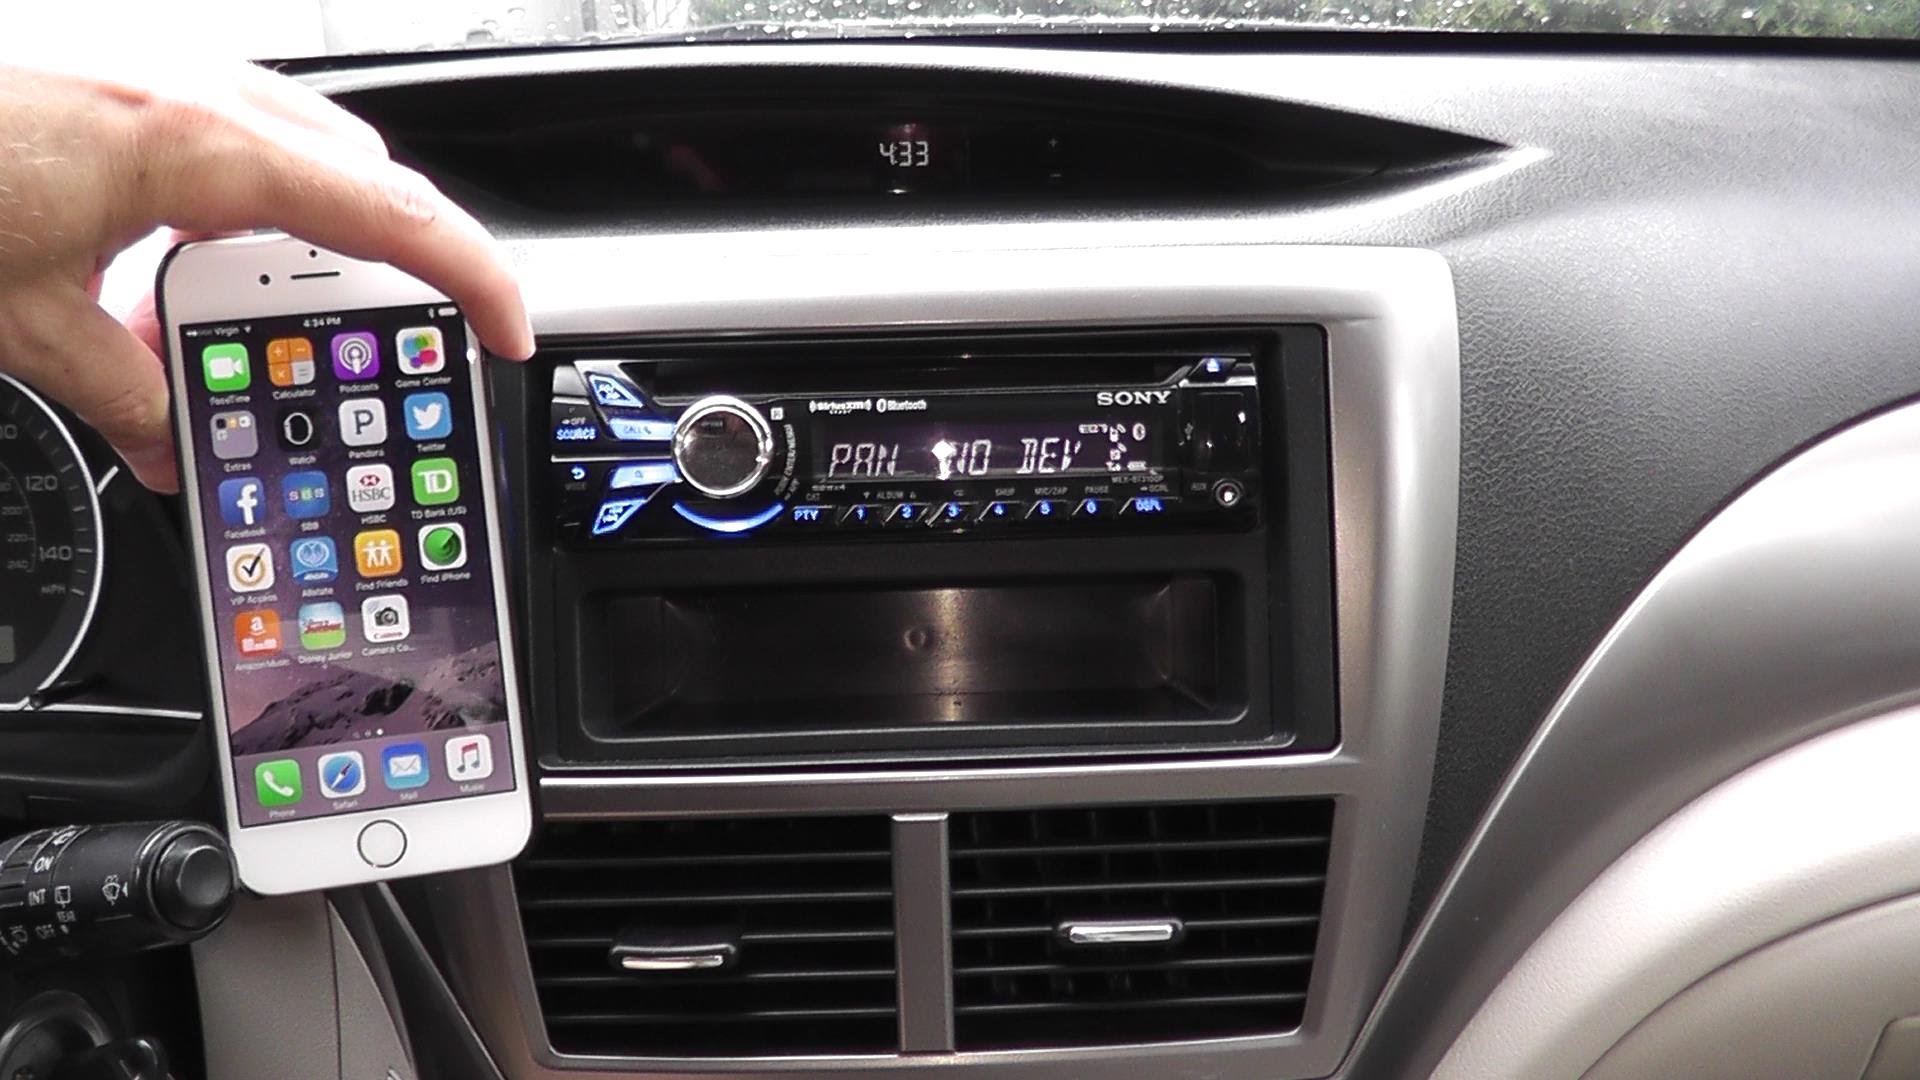 Car Stereo Features – Top 3 Features for Your New Car